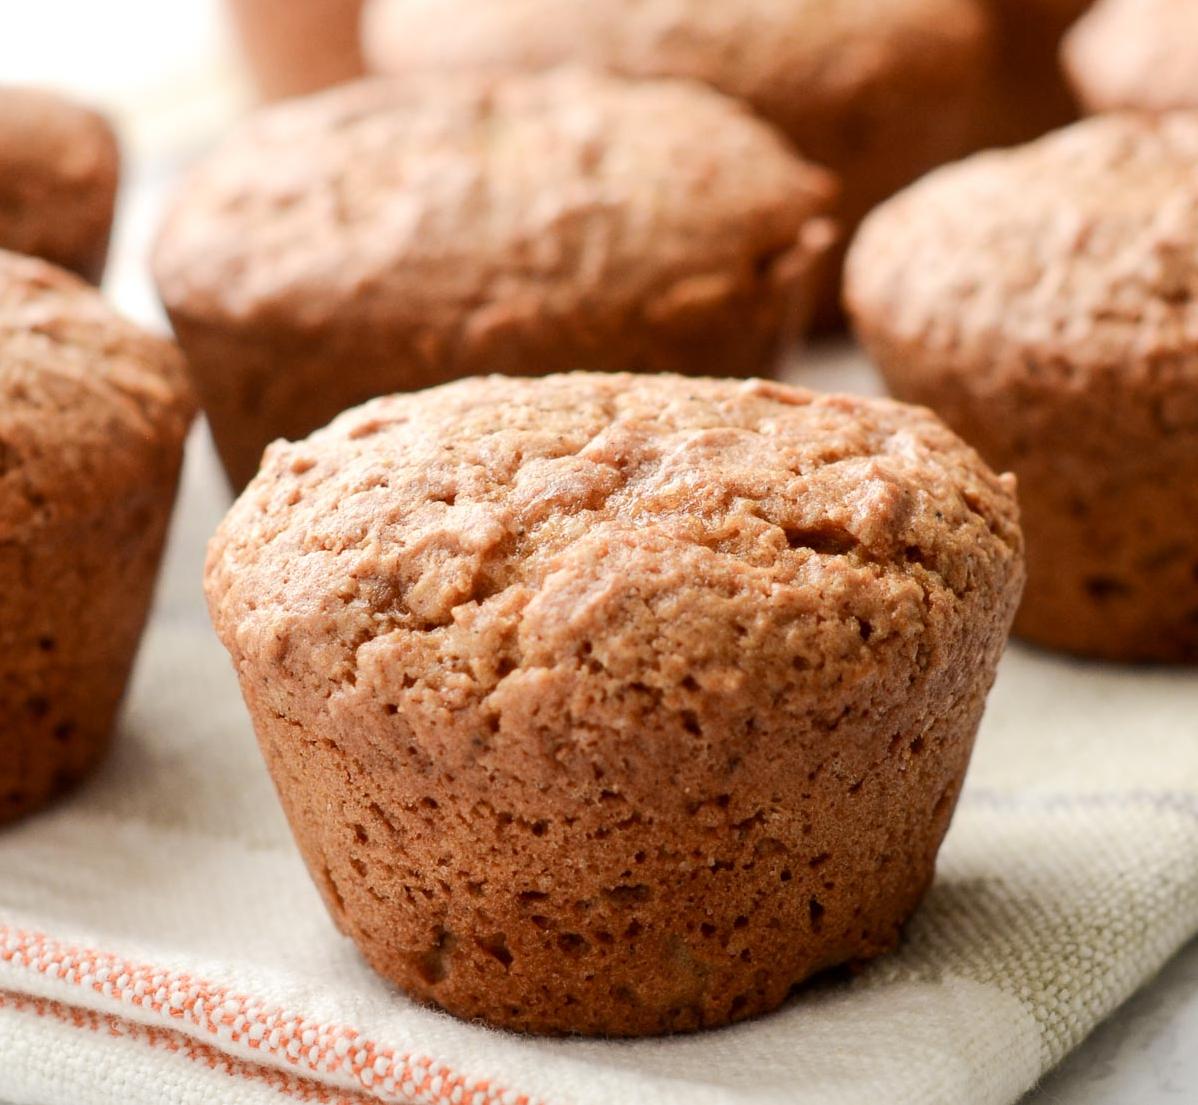  Is it breakfast time yet? These muffins are my go-to for a delicious and healthy morning snack.